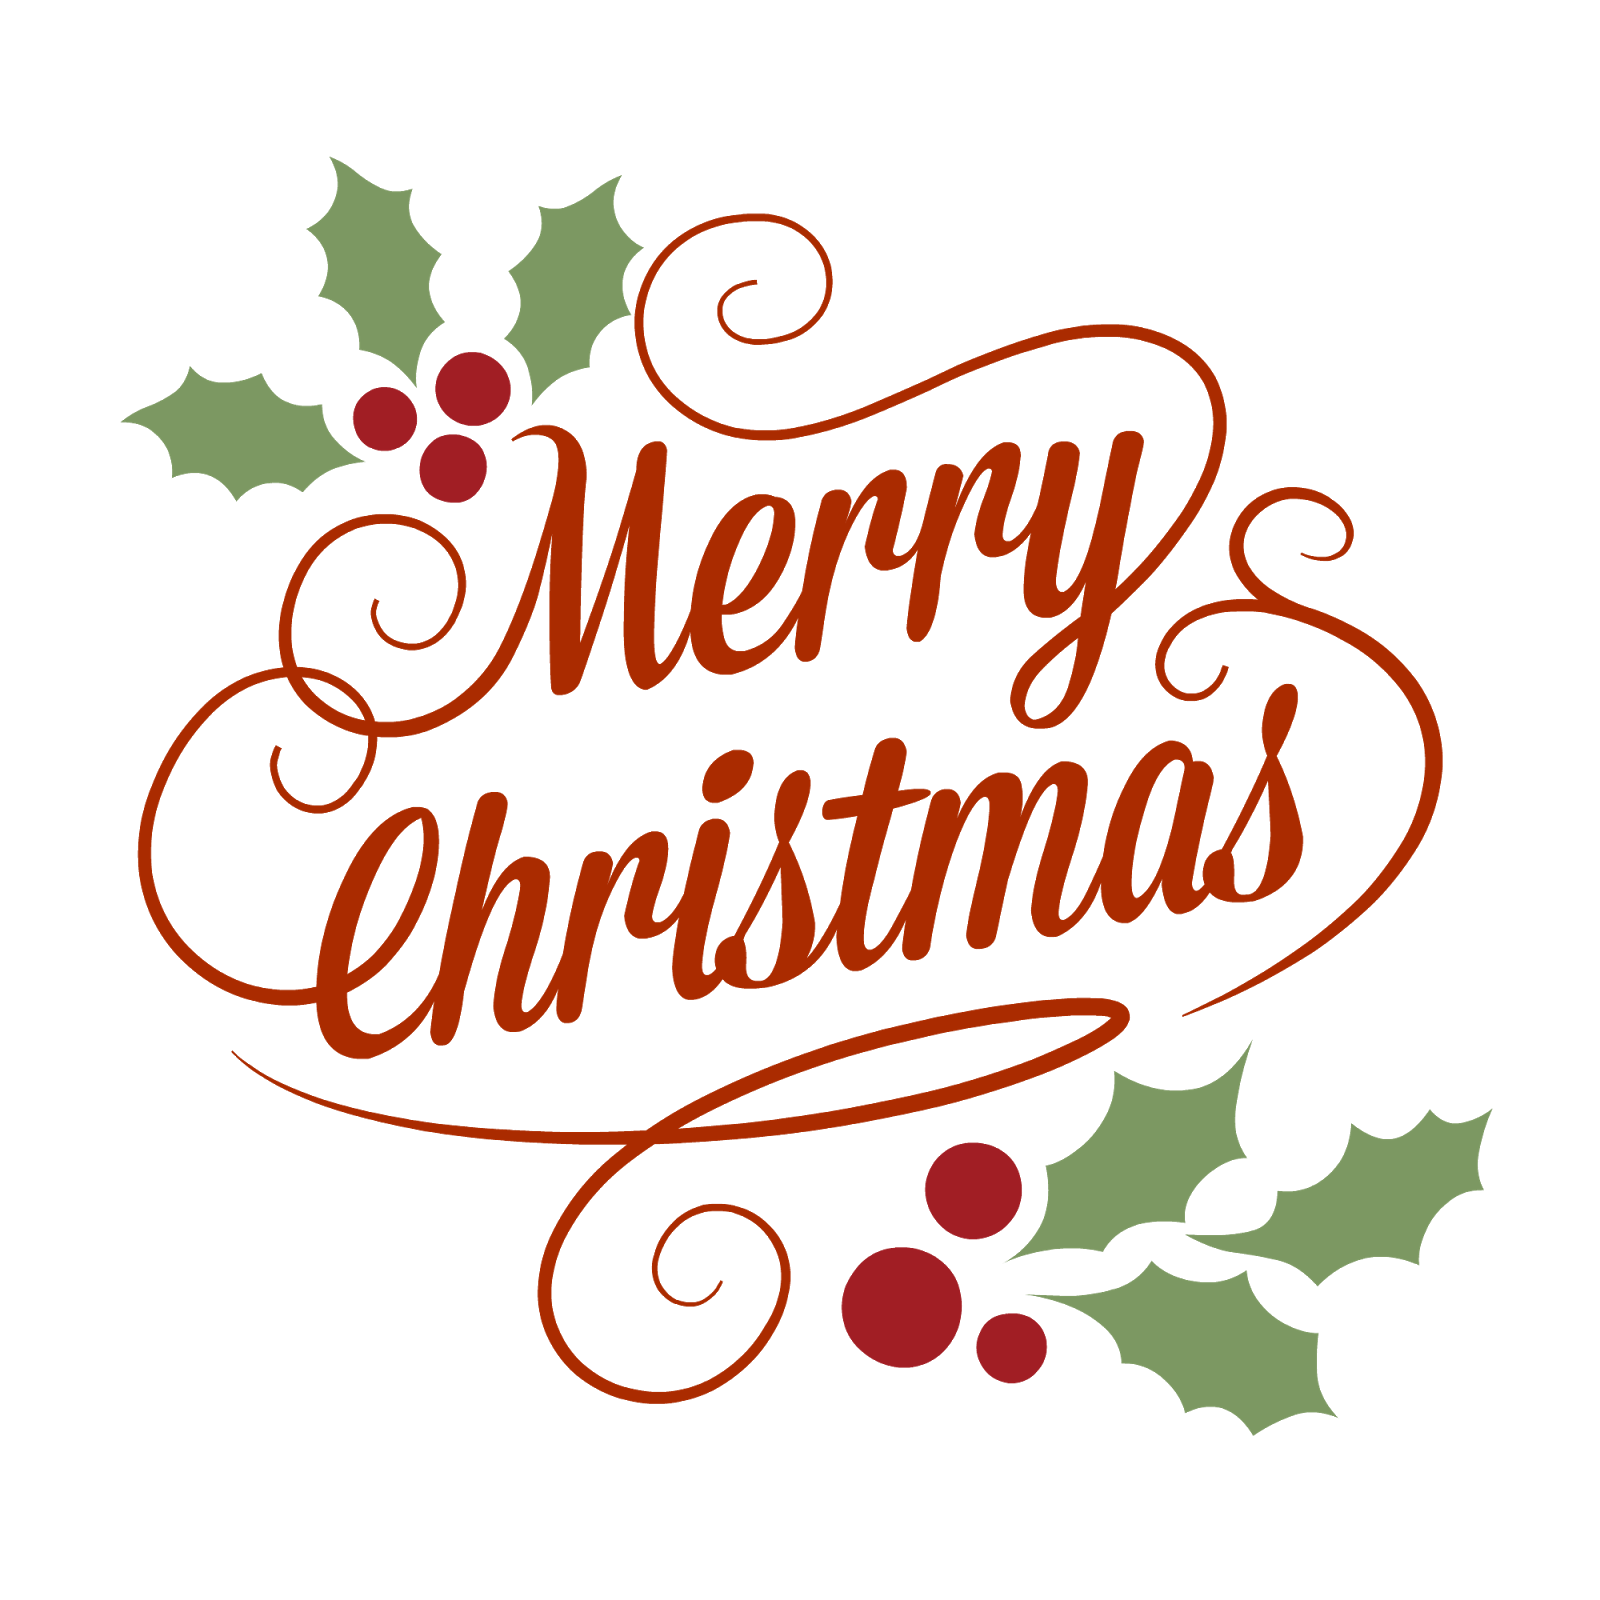 Merry Christmas Logo - Merry Christmas Transparent PNG Pictures - Free Icons and PNG ...